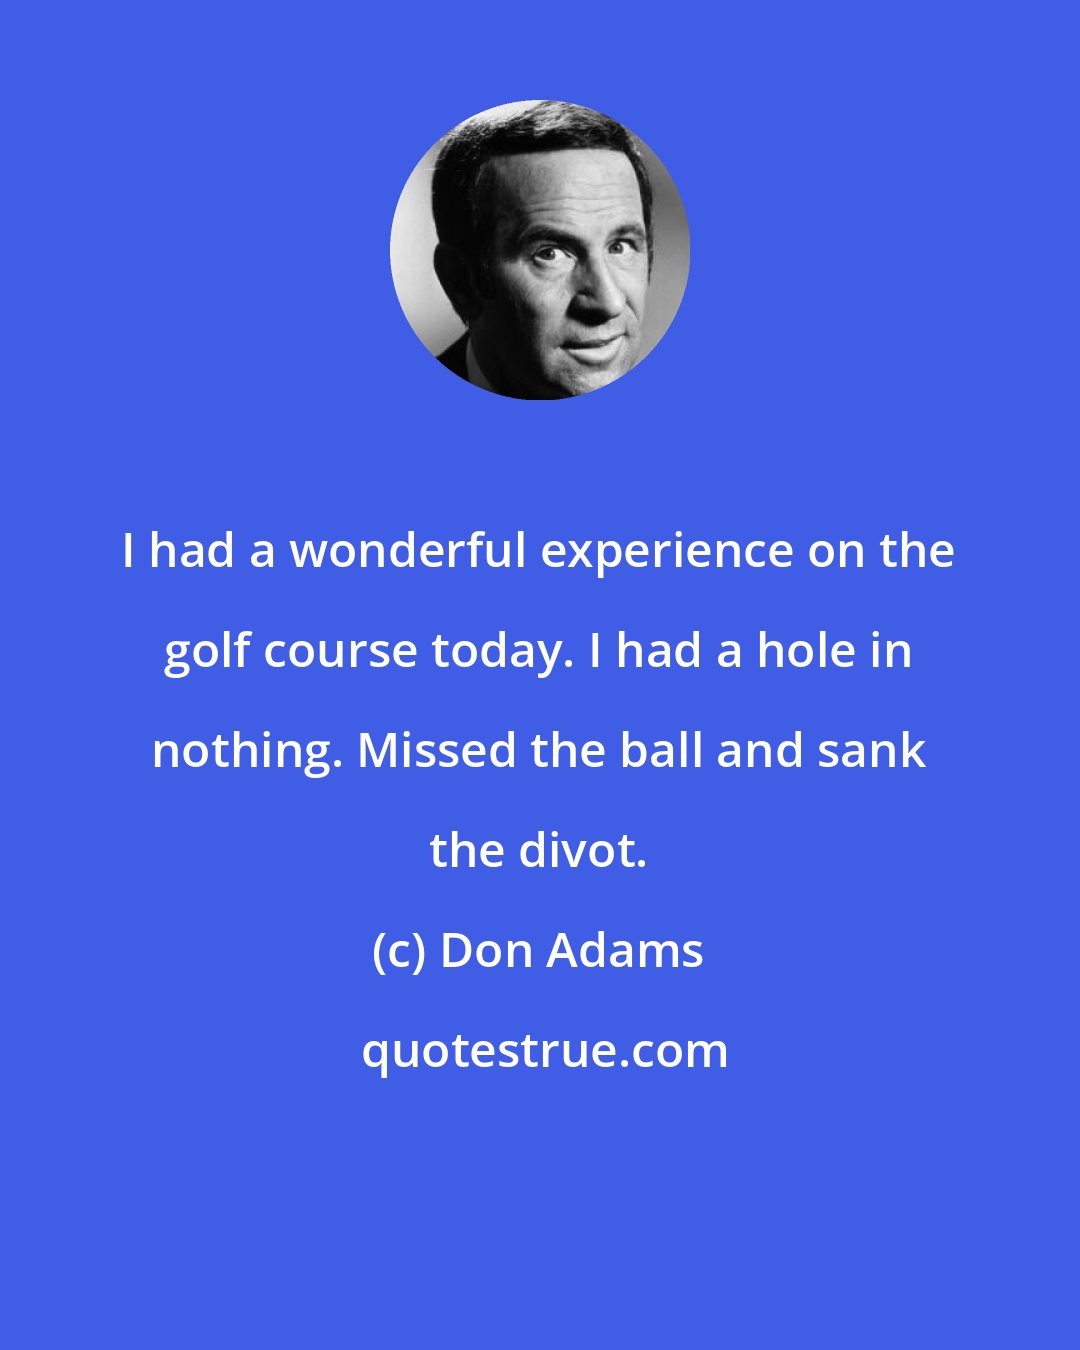 Don Adams: I had a wonderful experience on the golf course today. I had a hole in nothing. Missed the ball and sank the divot.